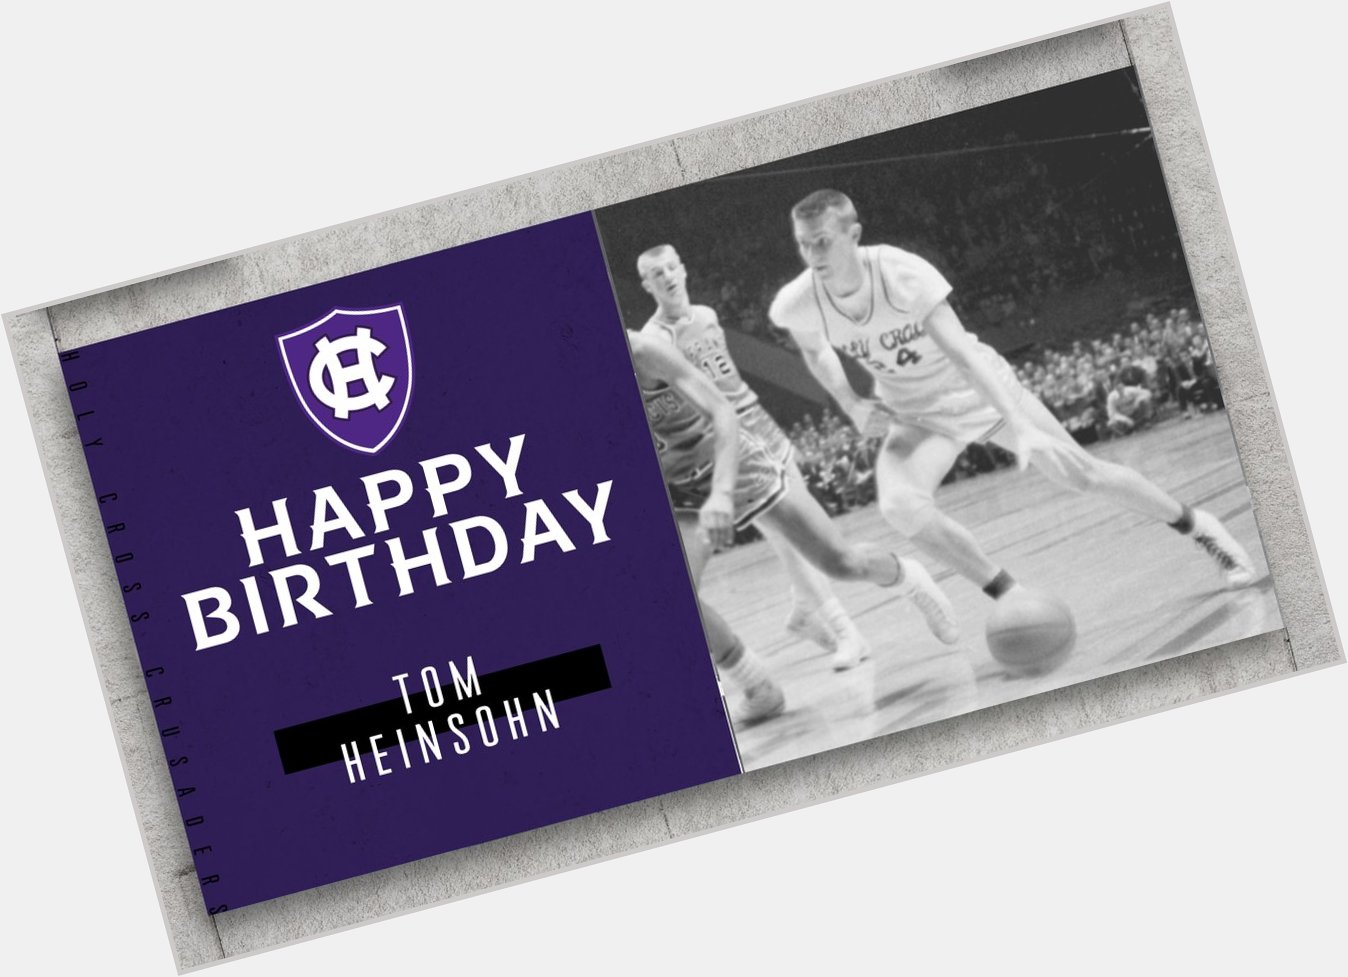 We would like to wish a happy 86th birthday to Tom Heinsohn!   